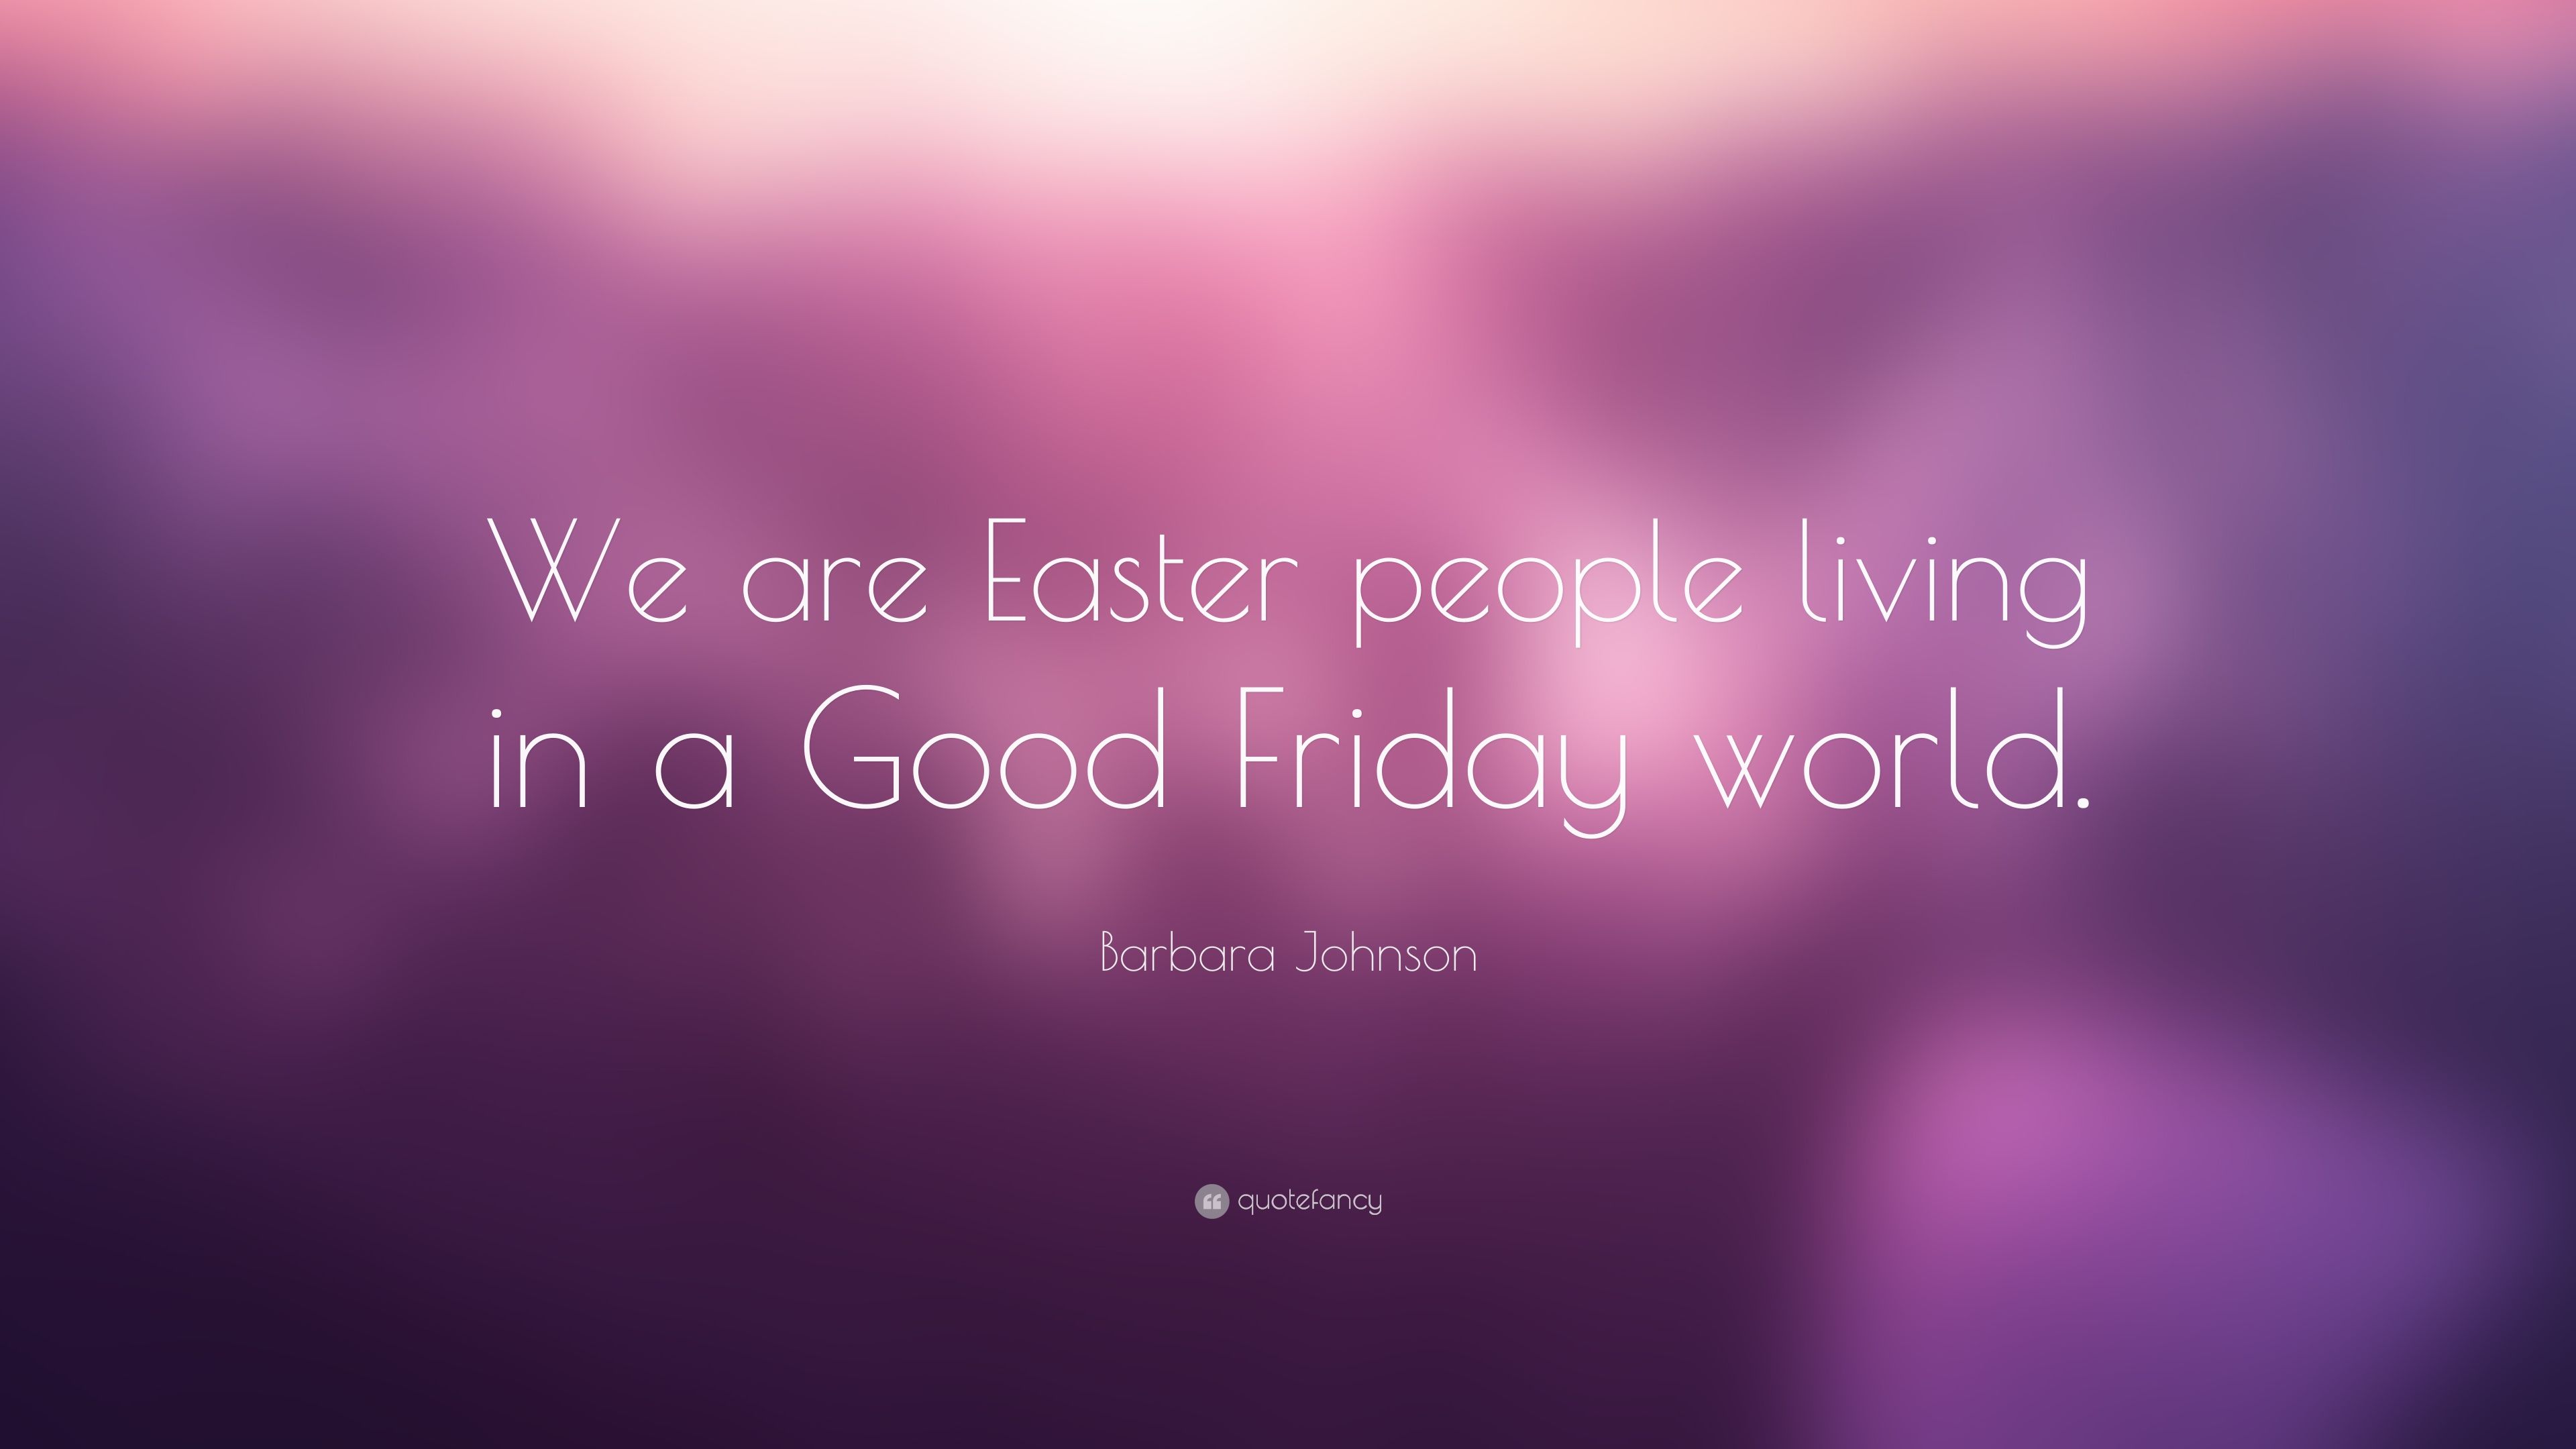 Barbara Johnson Quote: “We are Easter people living in a Good